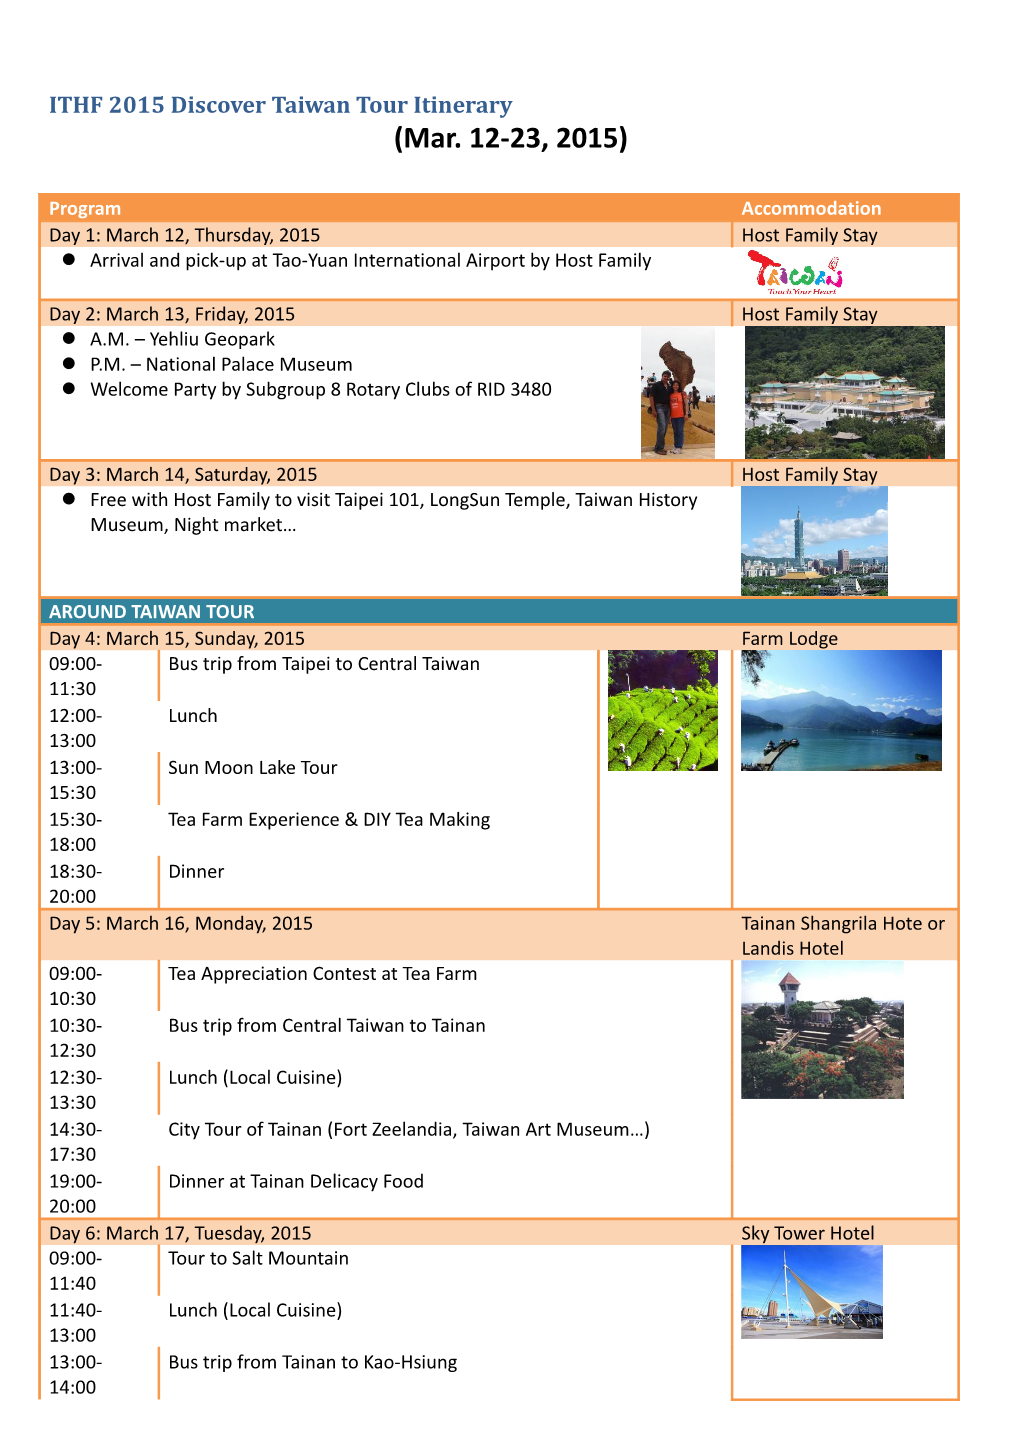 ITHF 2015 Discovertaiwan Tour Itinerary